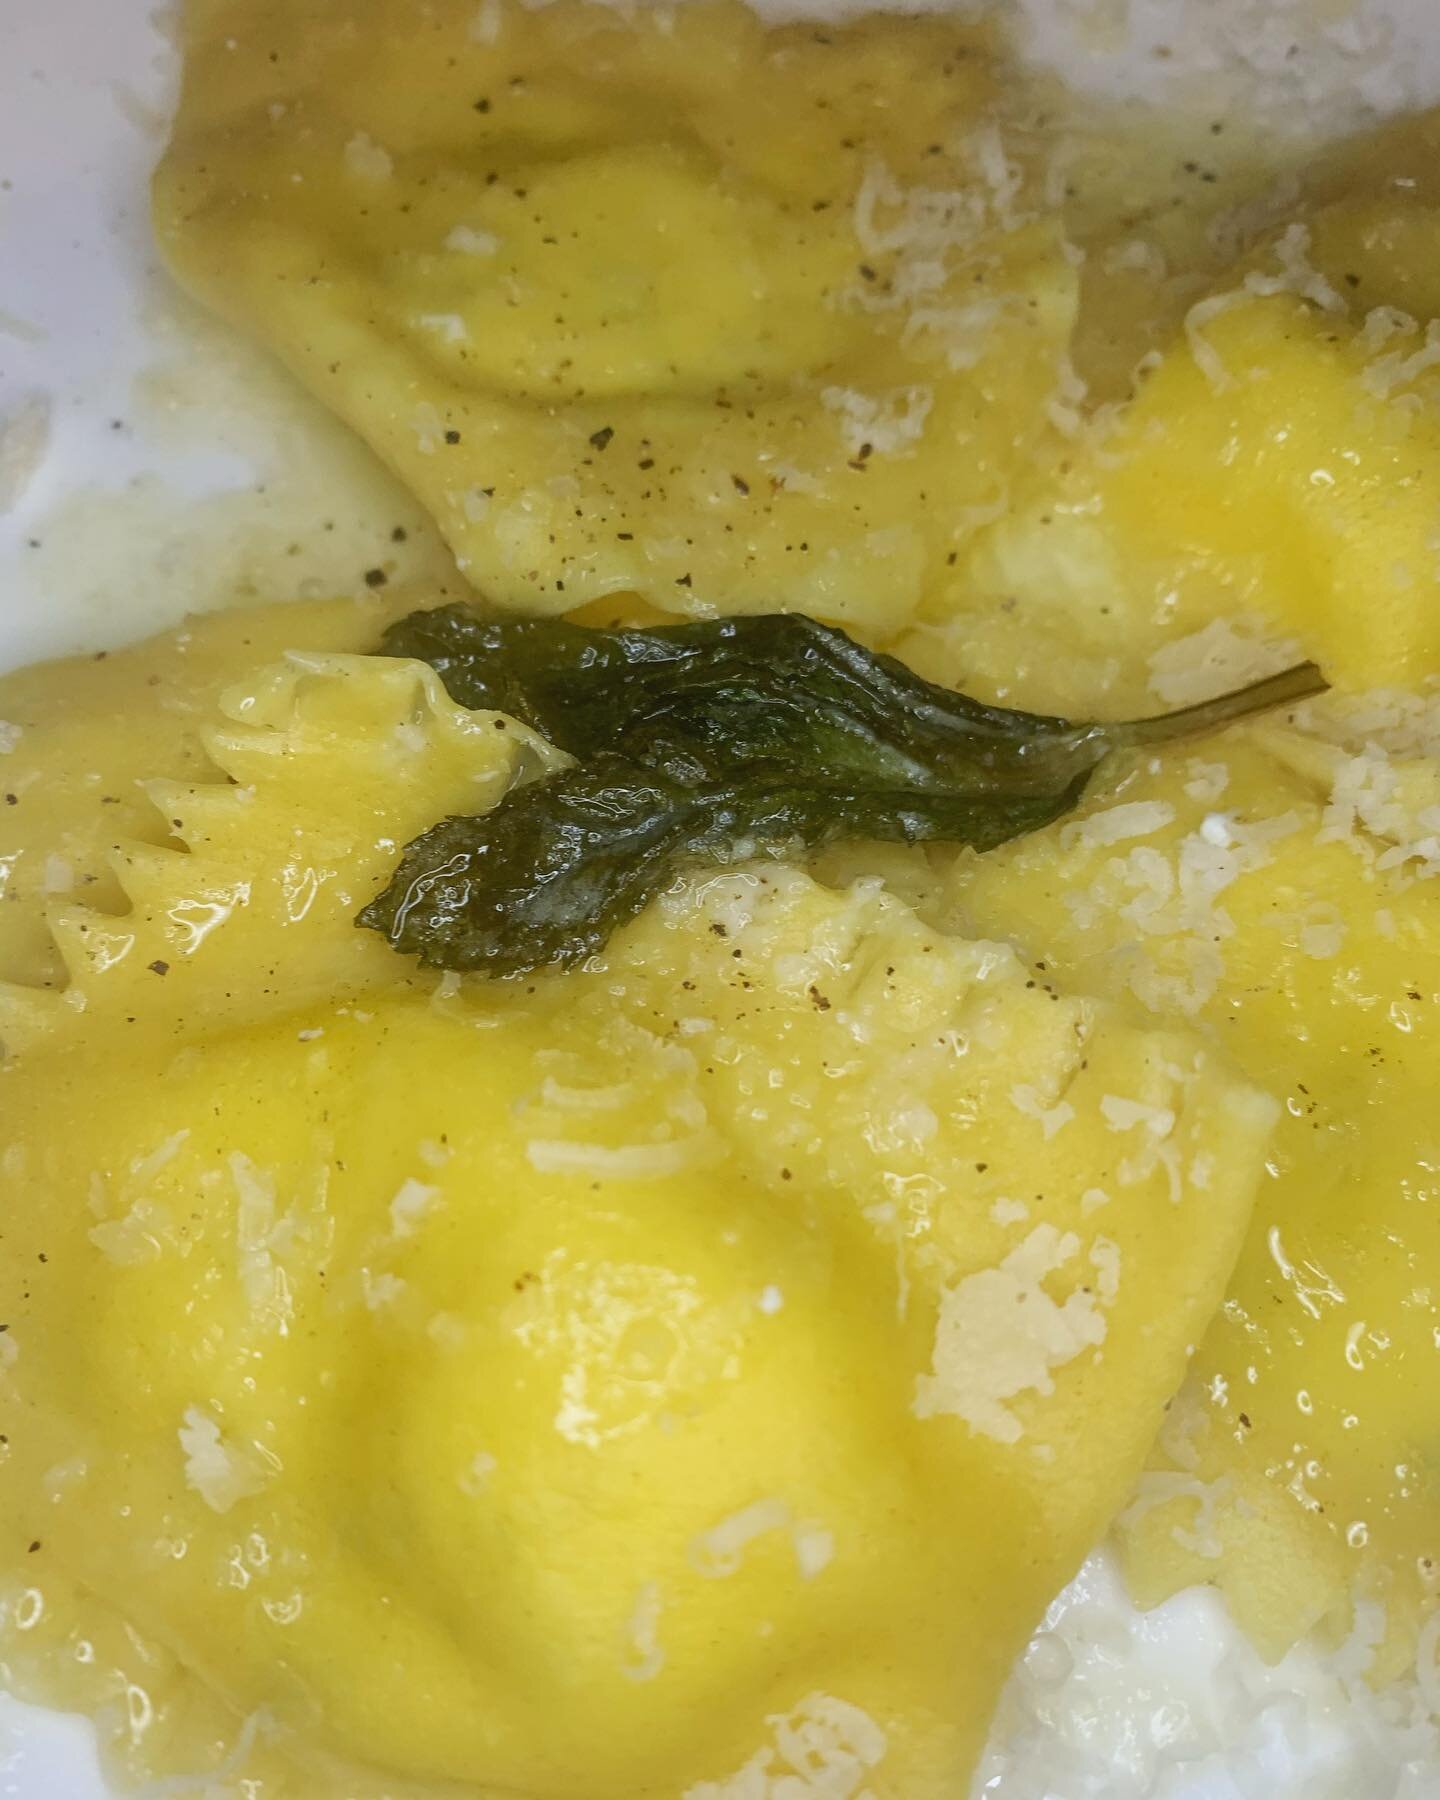 Handmade ravioli filled with ricotta, mint and freshly cracked black pepper, drizzled with a butter and sage sauce 🤤 

This dish will be added to the website soon! 

#ravioli #stpatricksday #italian #freshpasta #pastamaking #handmade #foodie #pastac